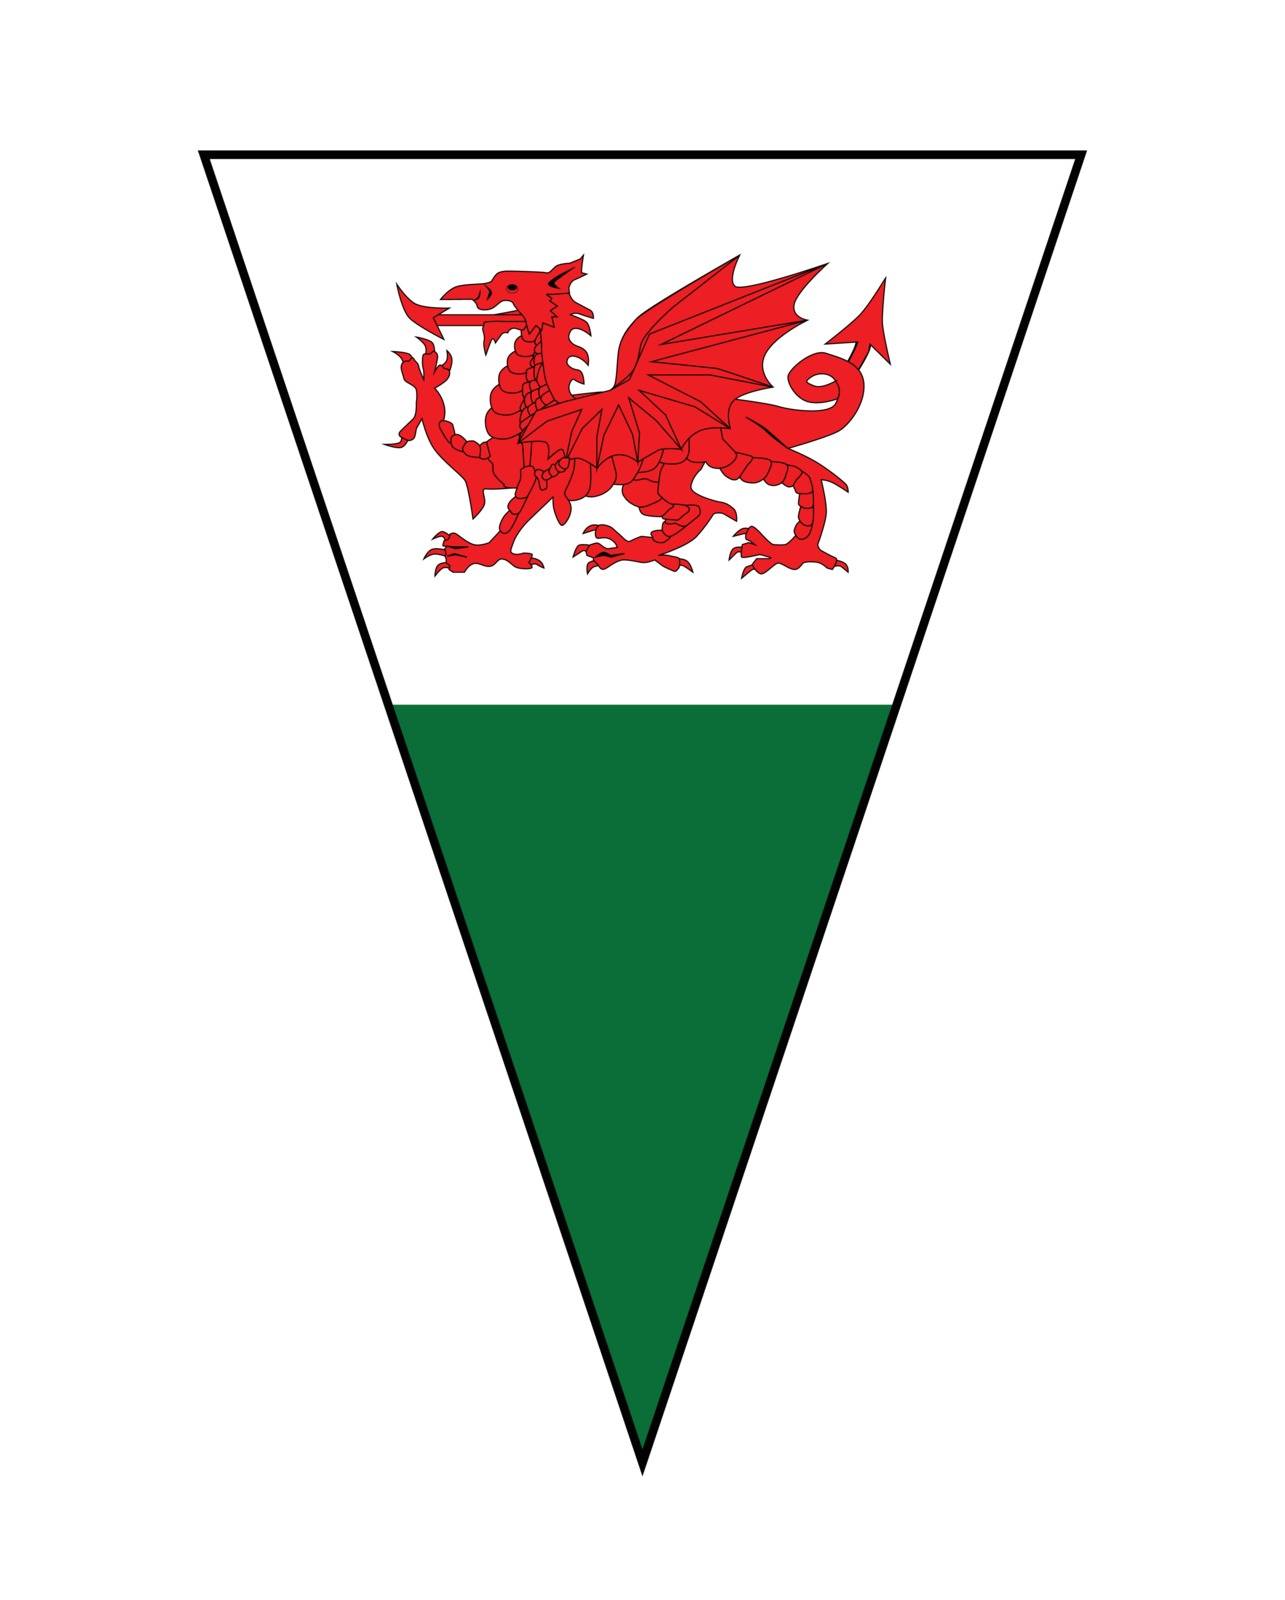 The Welsh Flag as part of a bunting